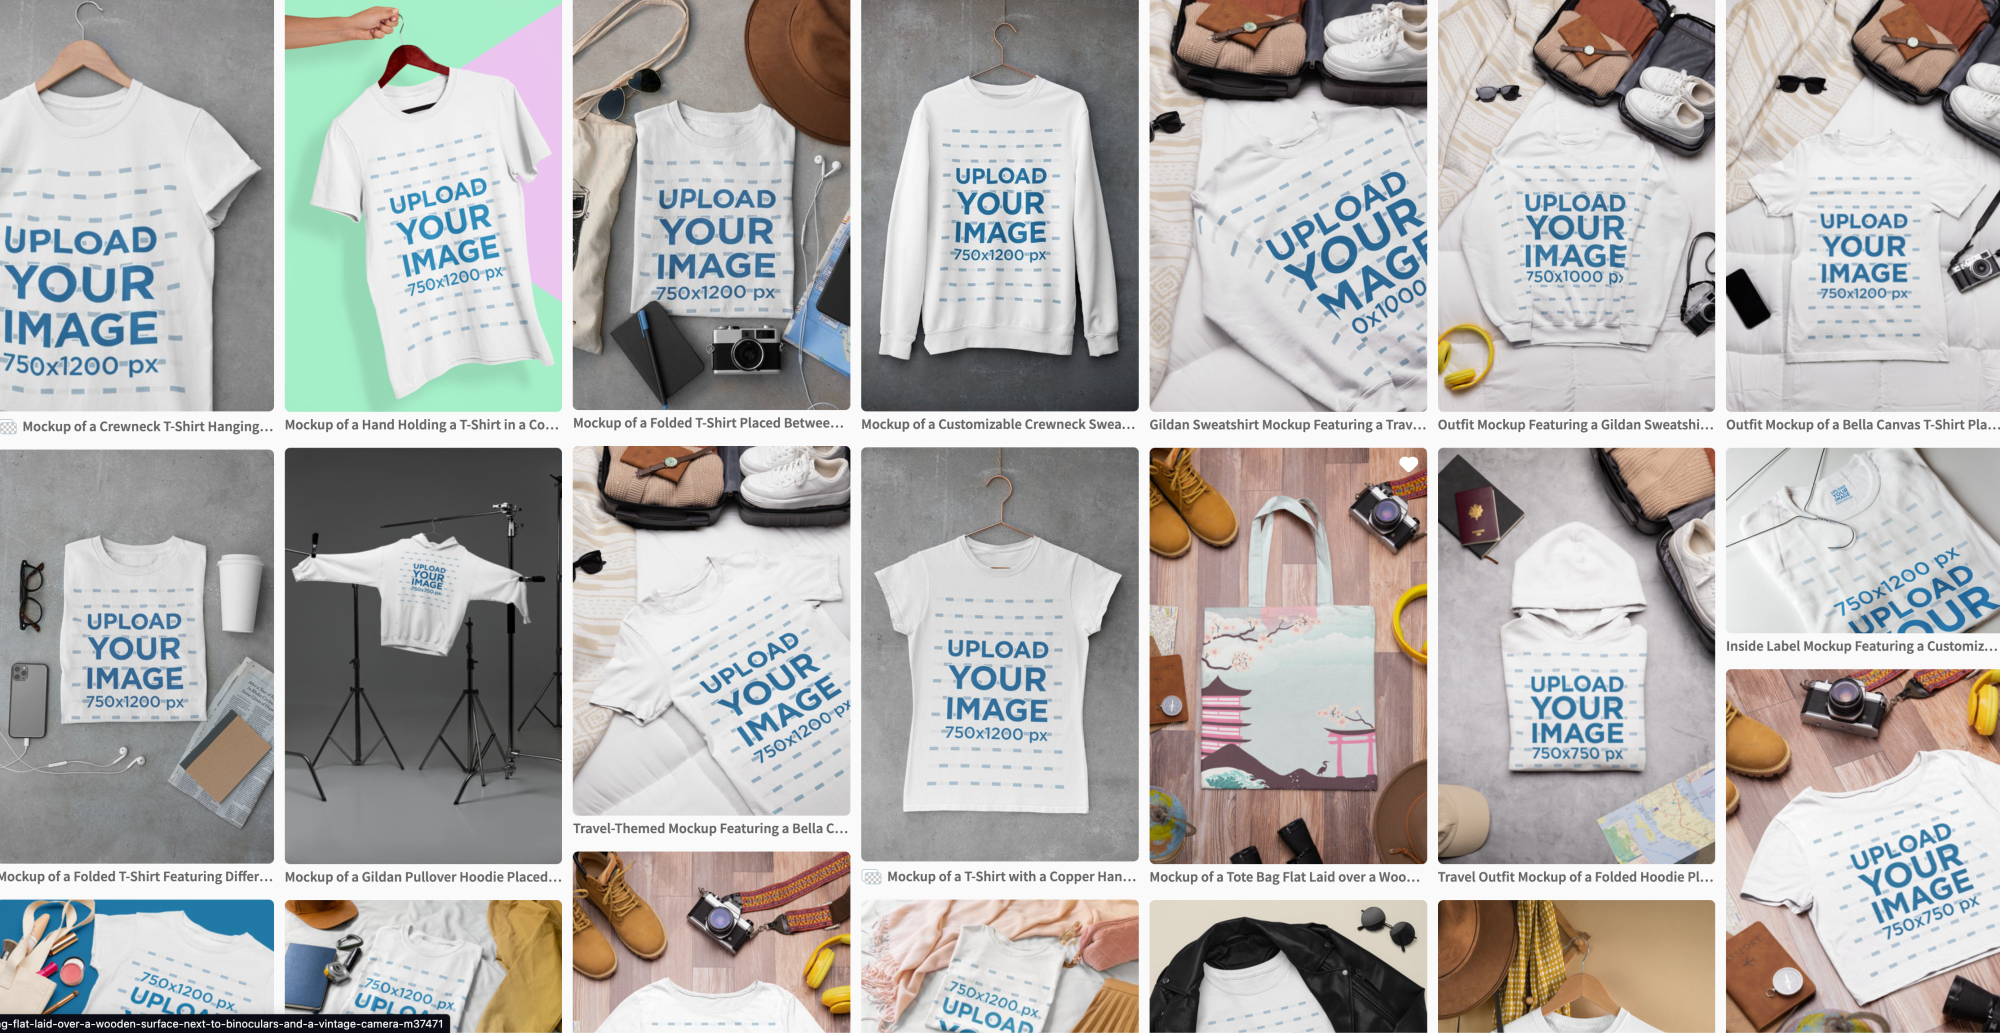 Collection of Placeit t-shirt mockups featuring diverse scenarios and styles for branding and design